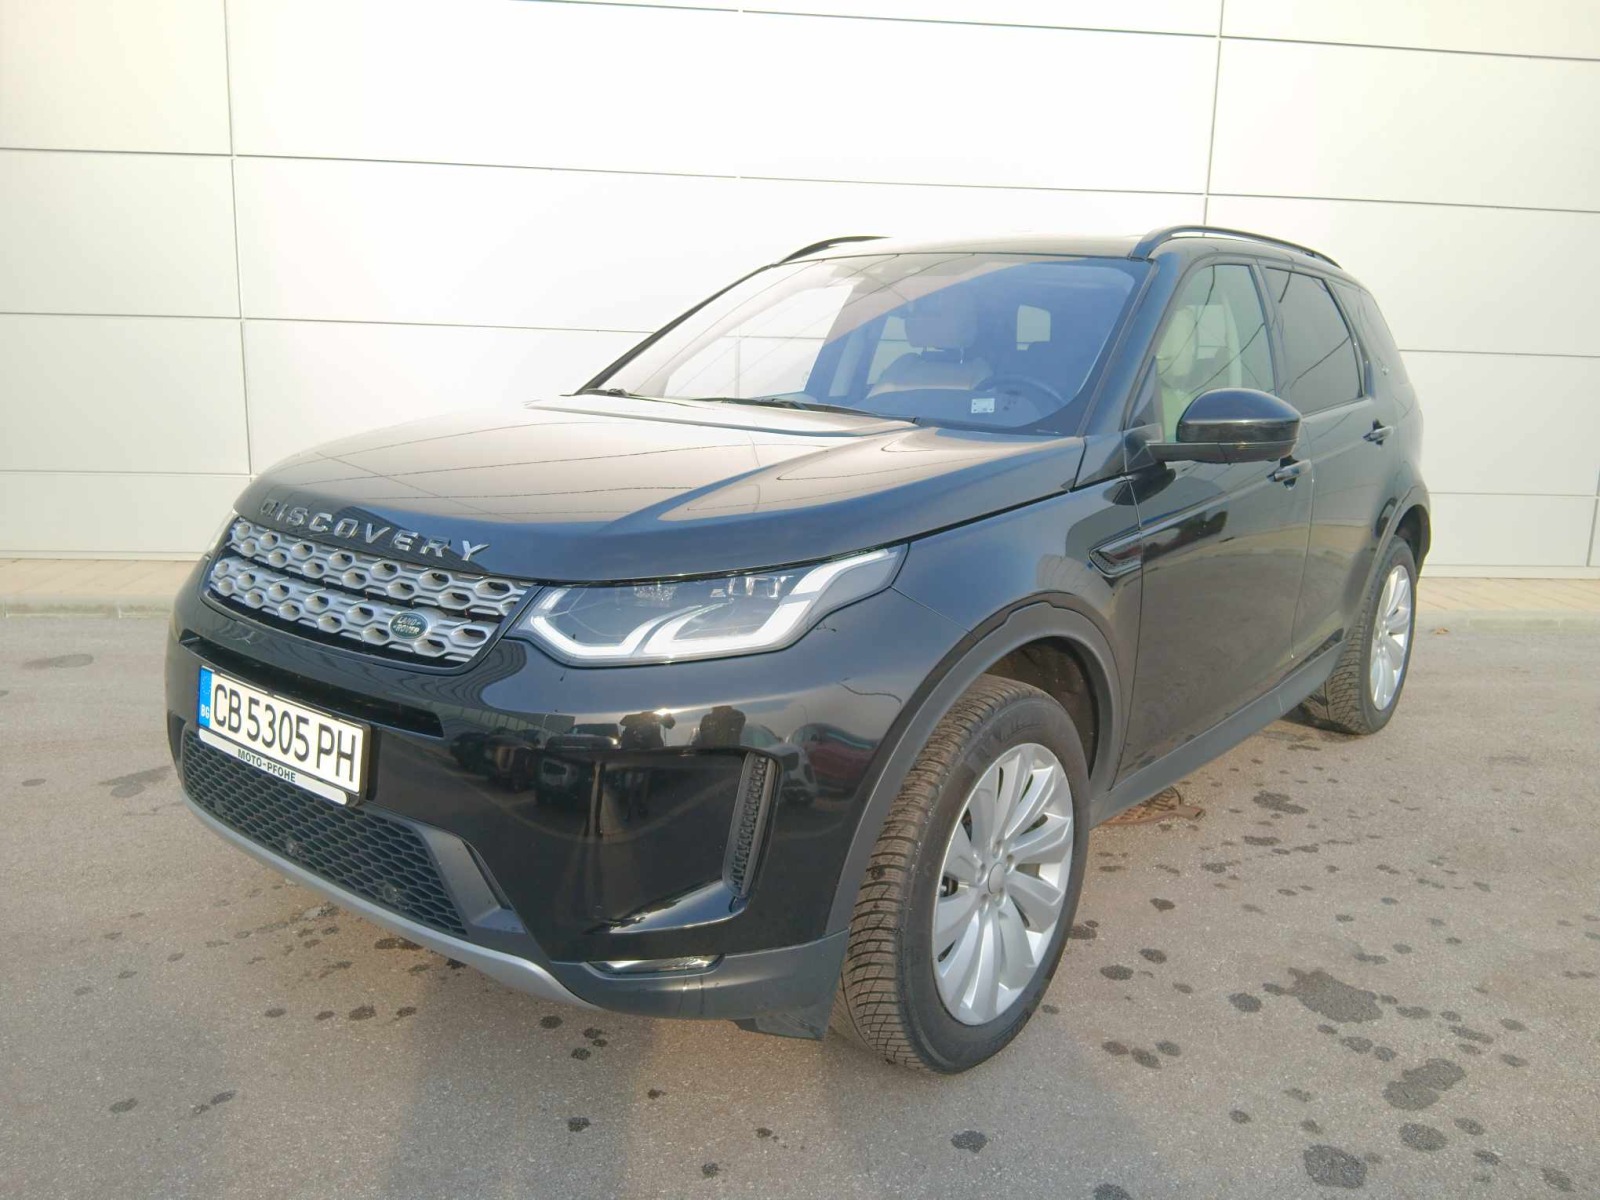 Land Rover Discovery 2.0D TD4 - изображение 1